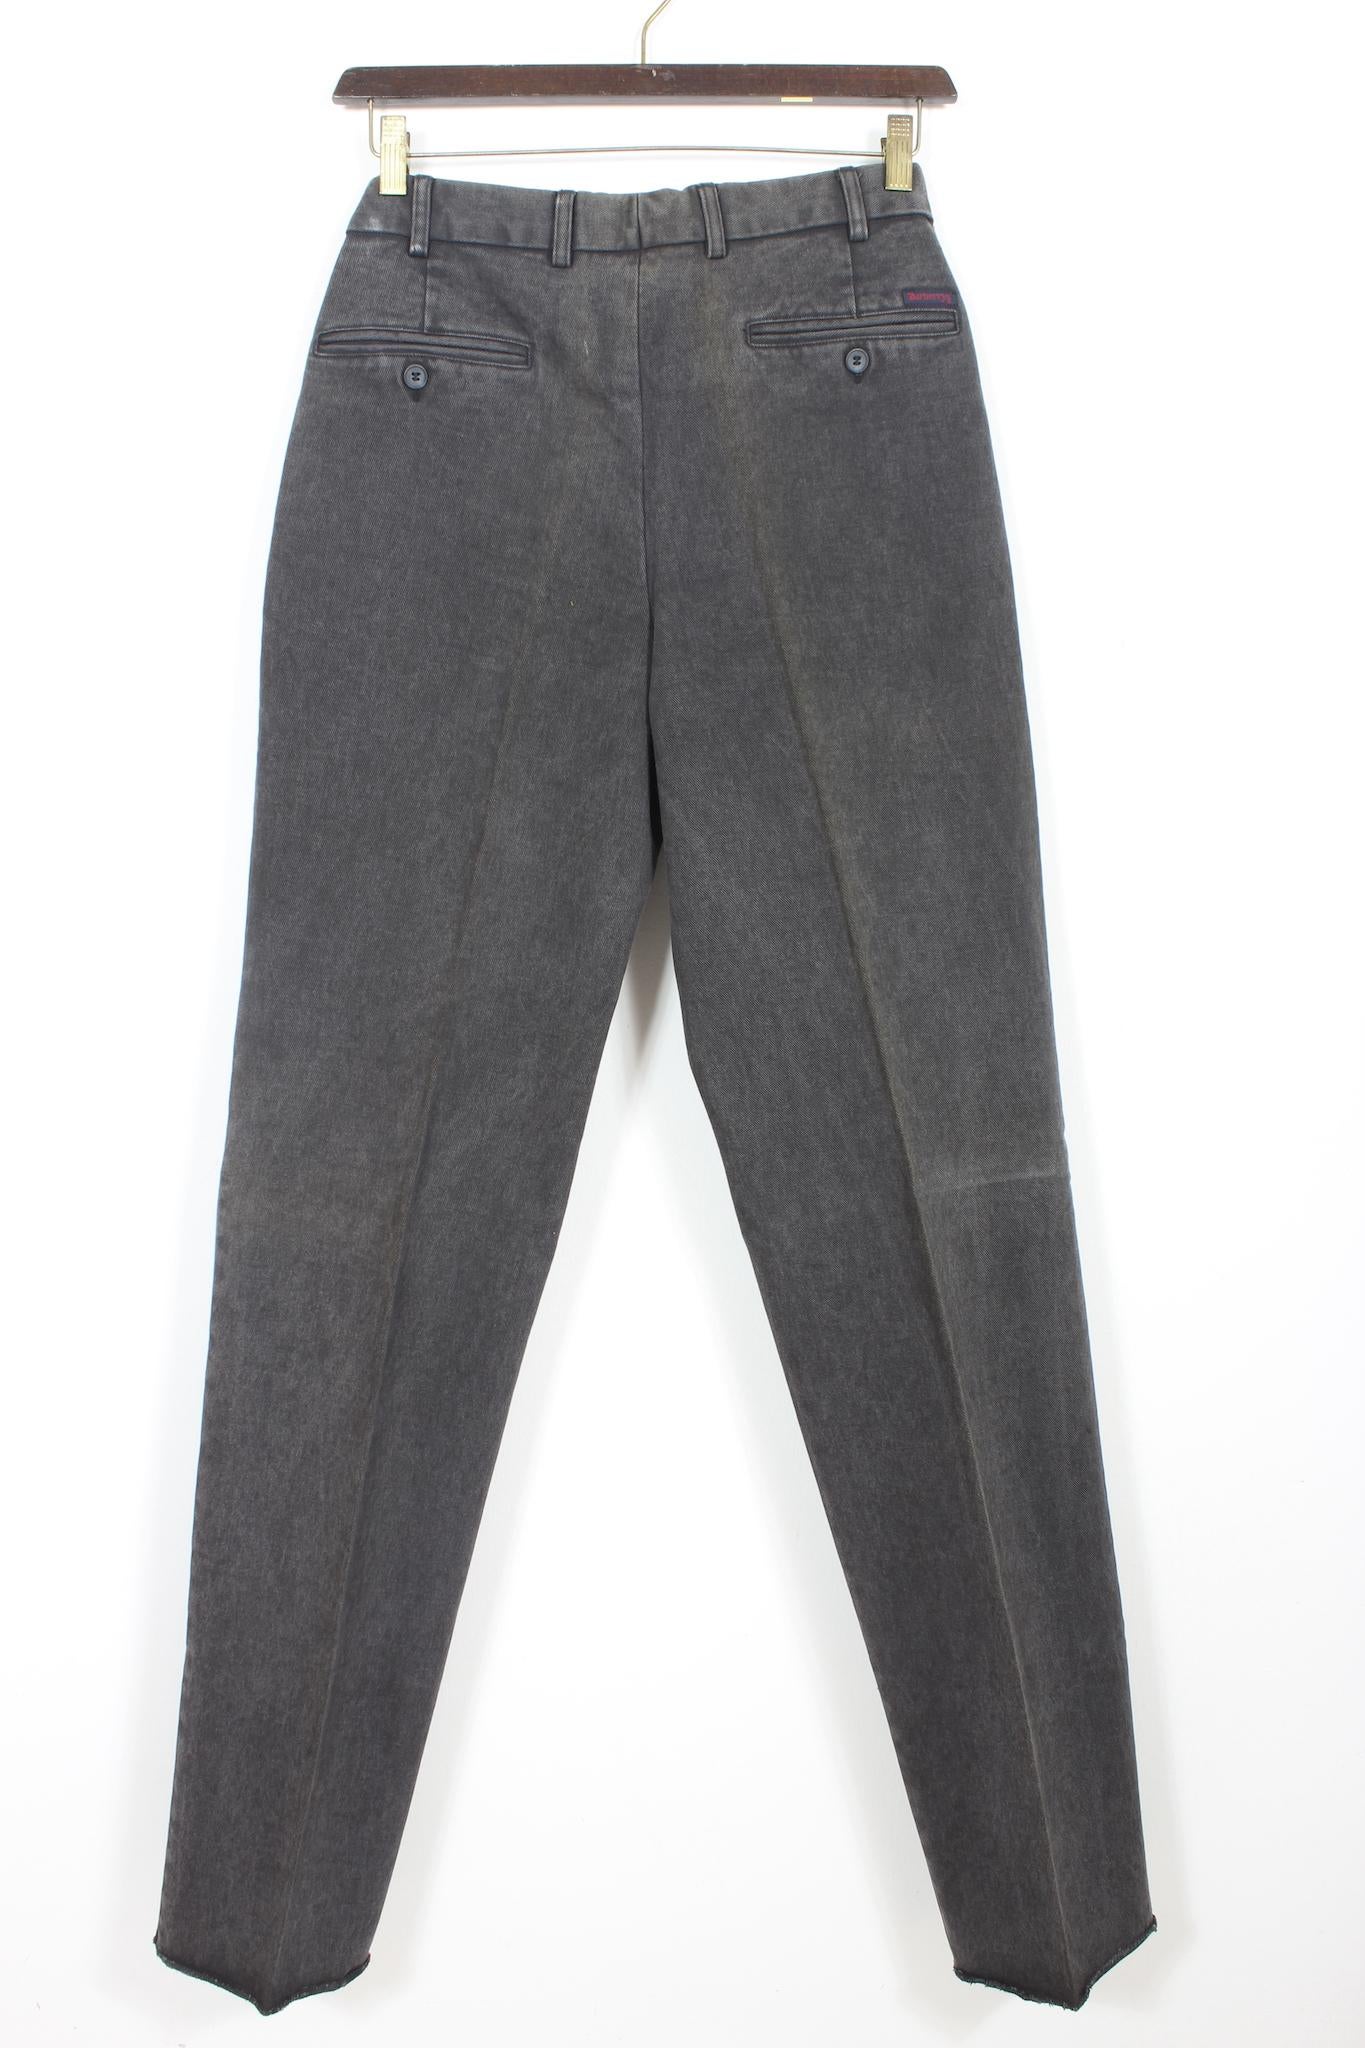 Burberry Grey Cotton Classic Denim Pants 90s In Excellent Condition For Sale In Brindisi, Bt